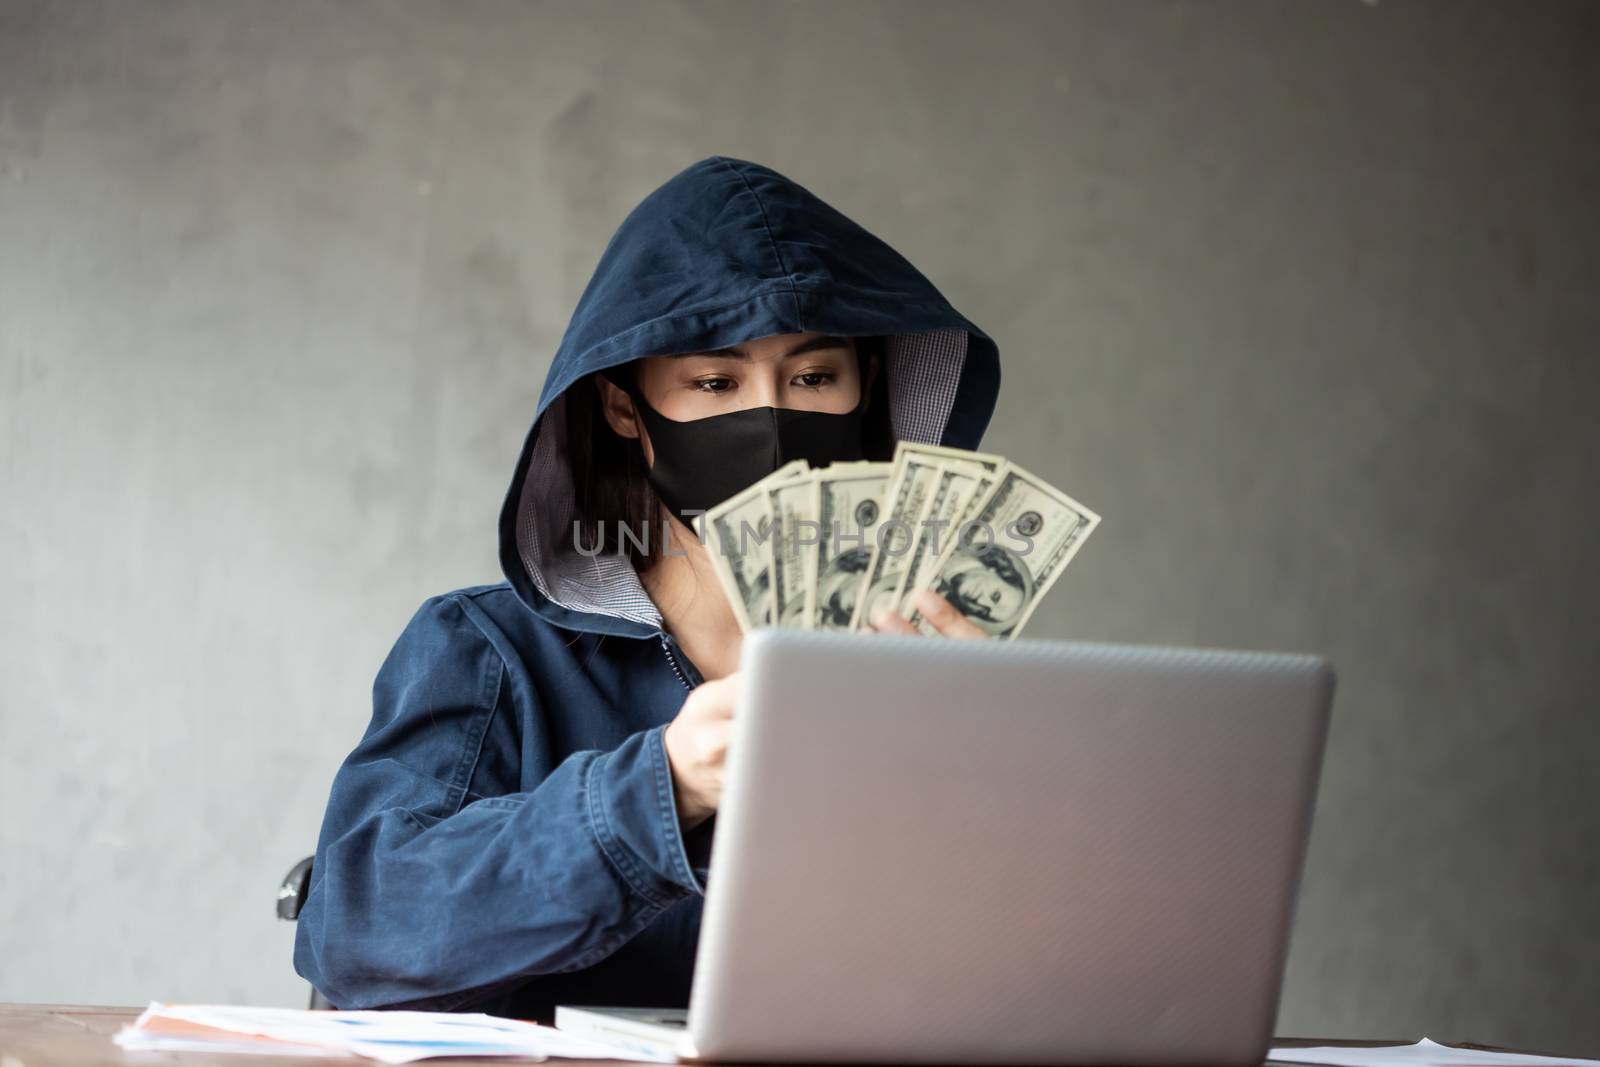 Professional hacker women Wearing a blue shirt with a hood Steal by photosam